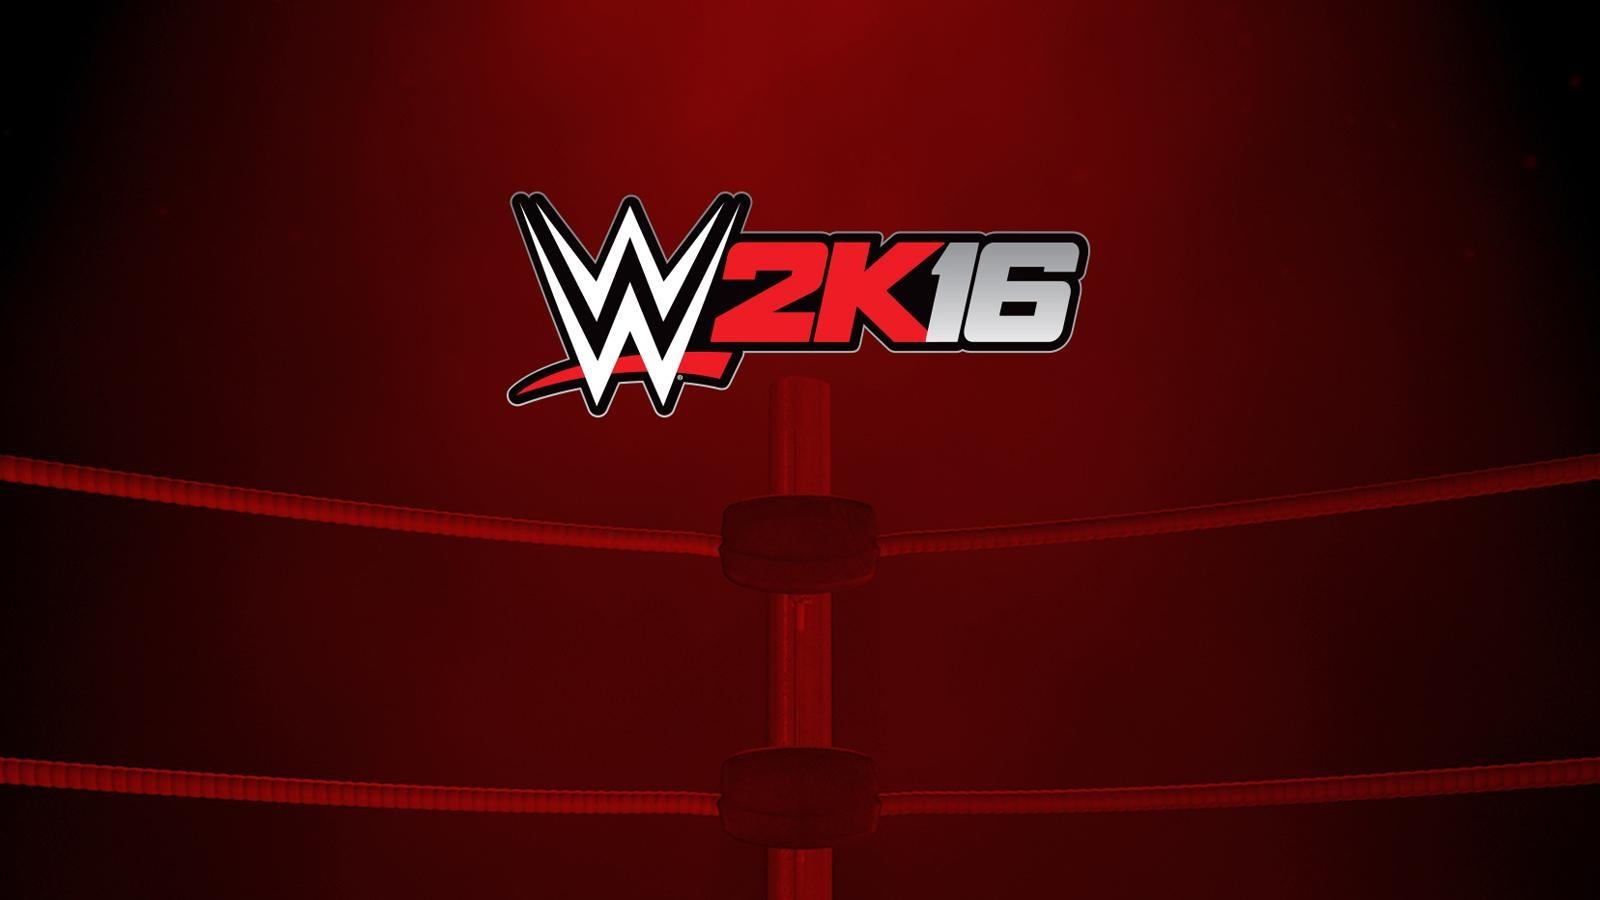 Wallpapers | WWE 2K16 Images